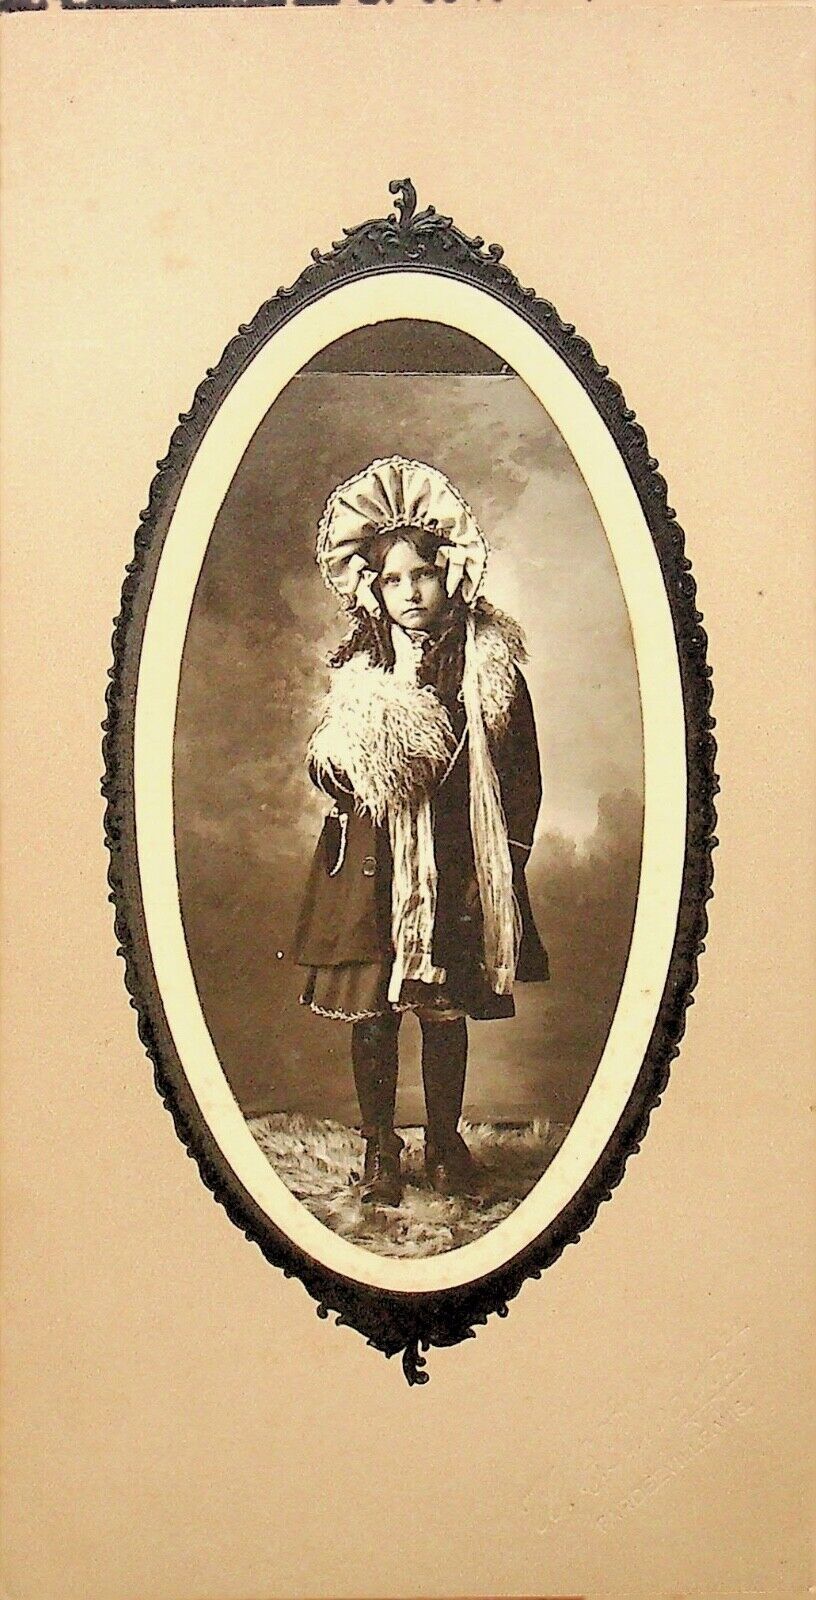 CIRCA 1880s CABINET CARD YOUNG GIRL WITH LARGE UNUSUAL HAT - E12-B